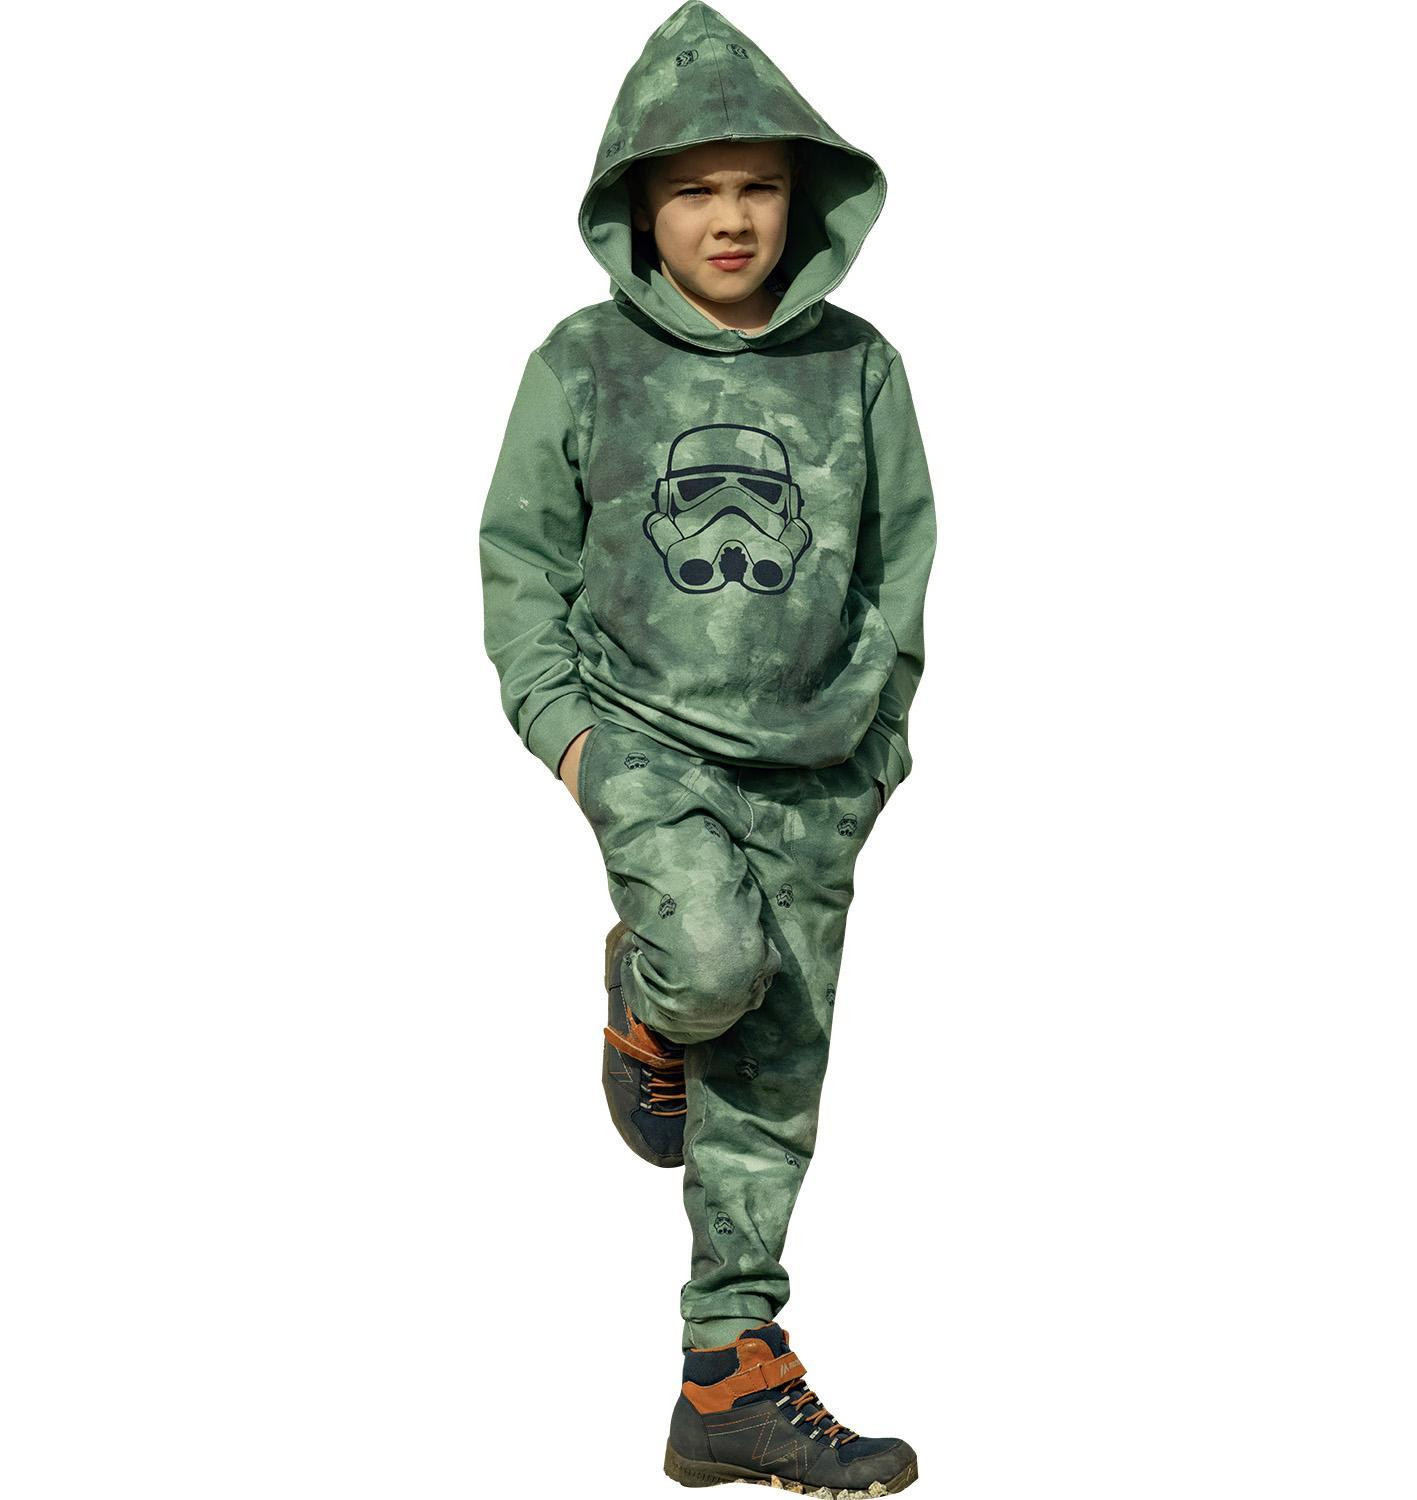 KID'S HOODIE (ALEX) - ROCKET AND COMETS (SPACE EXPEDITION) / ACID WASH GOLD - sewing set